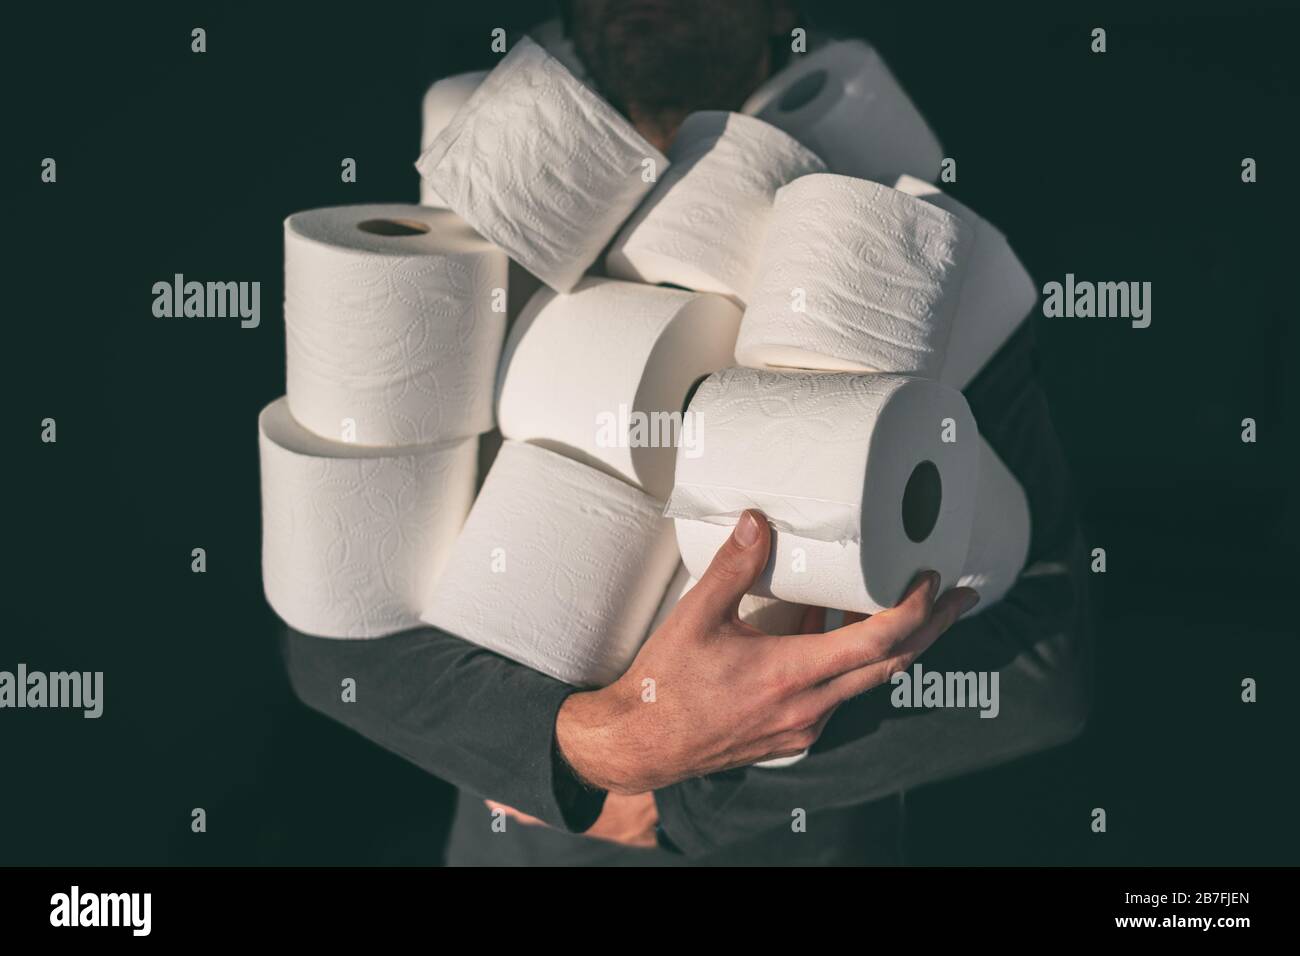 Toilet paper shortage coronavirus panic buying man hoarding carrying many rolls at home in fear of corona virus outbreak closing shopping stores. Stock Photo